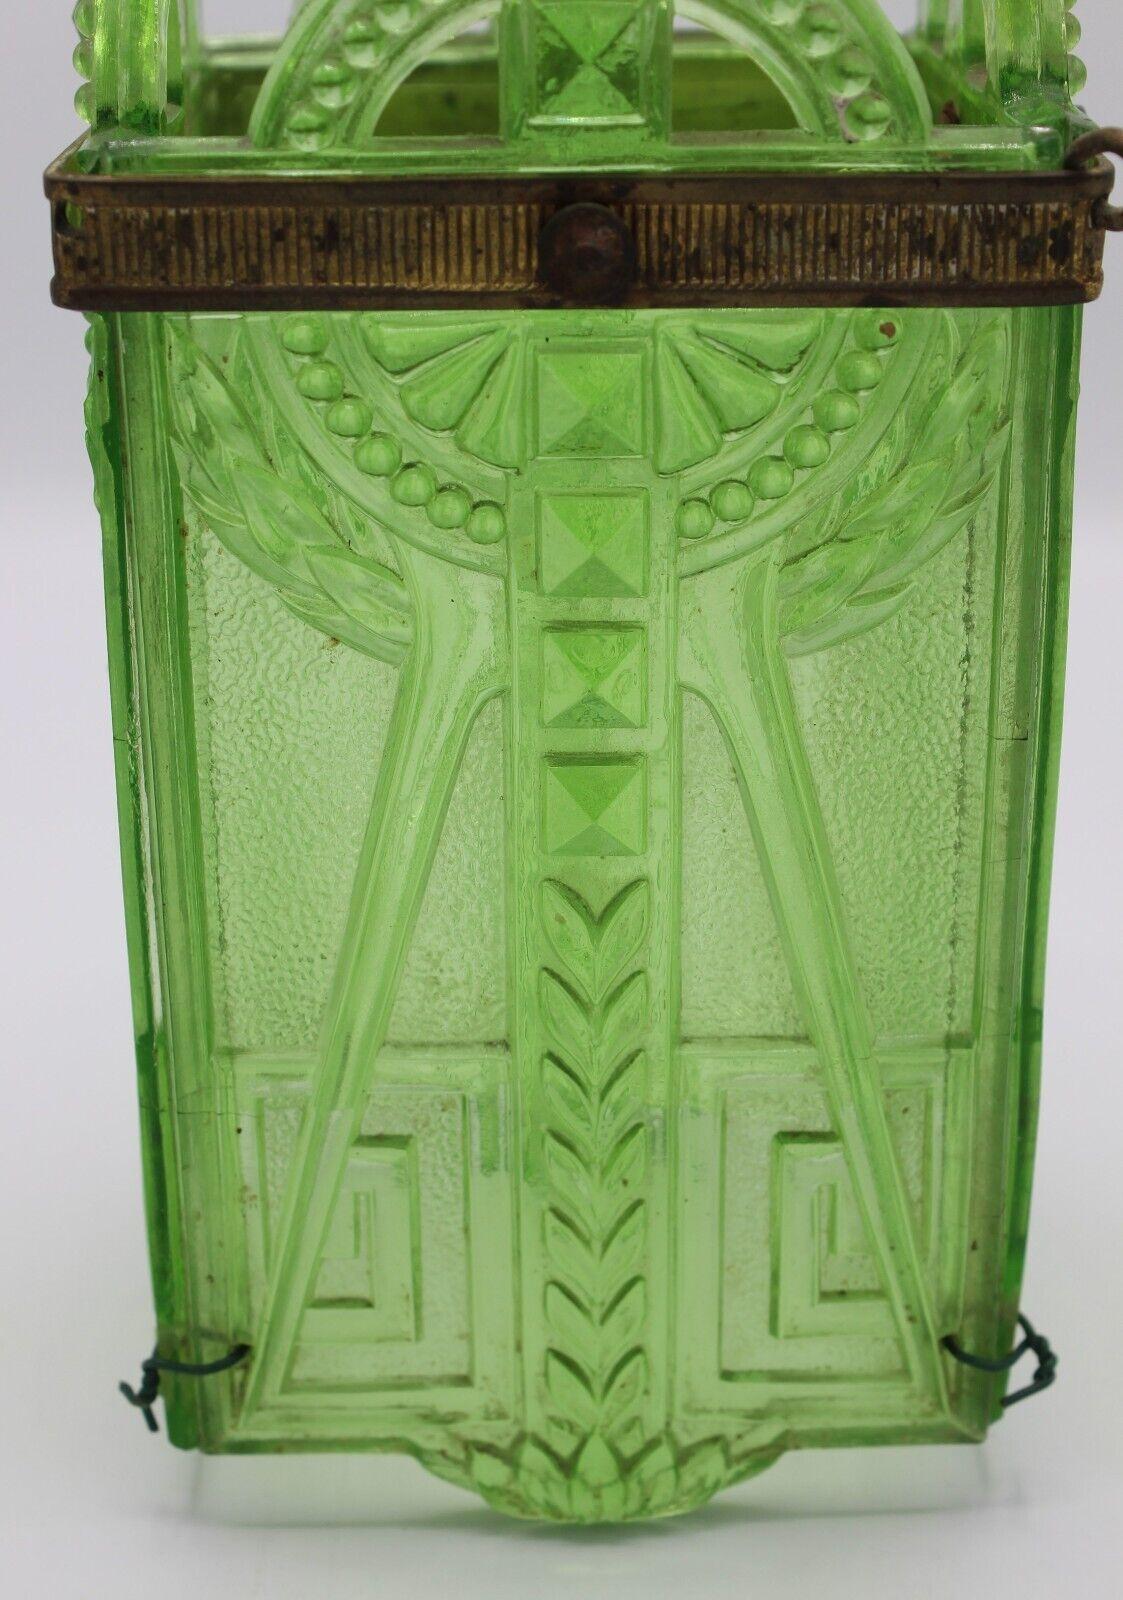 19thc French Empire Intricately Patterned Green Art Glass Lantern with Bronze Element. Lovely antique lantern which will arrive newly electrified and with 15 inches of chain and ceiling canopy. Gilt bronze banding accent with one small knob switched.